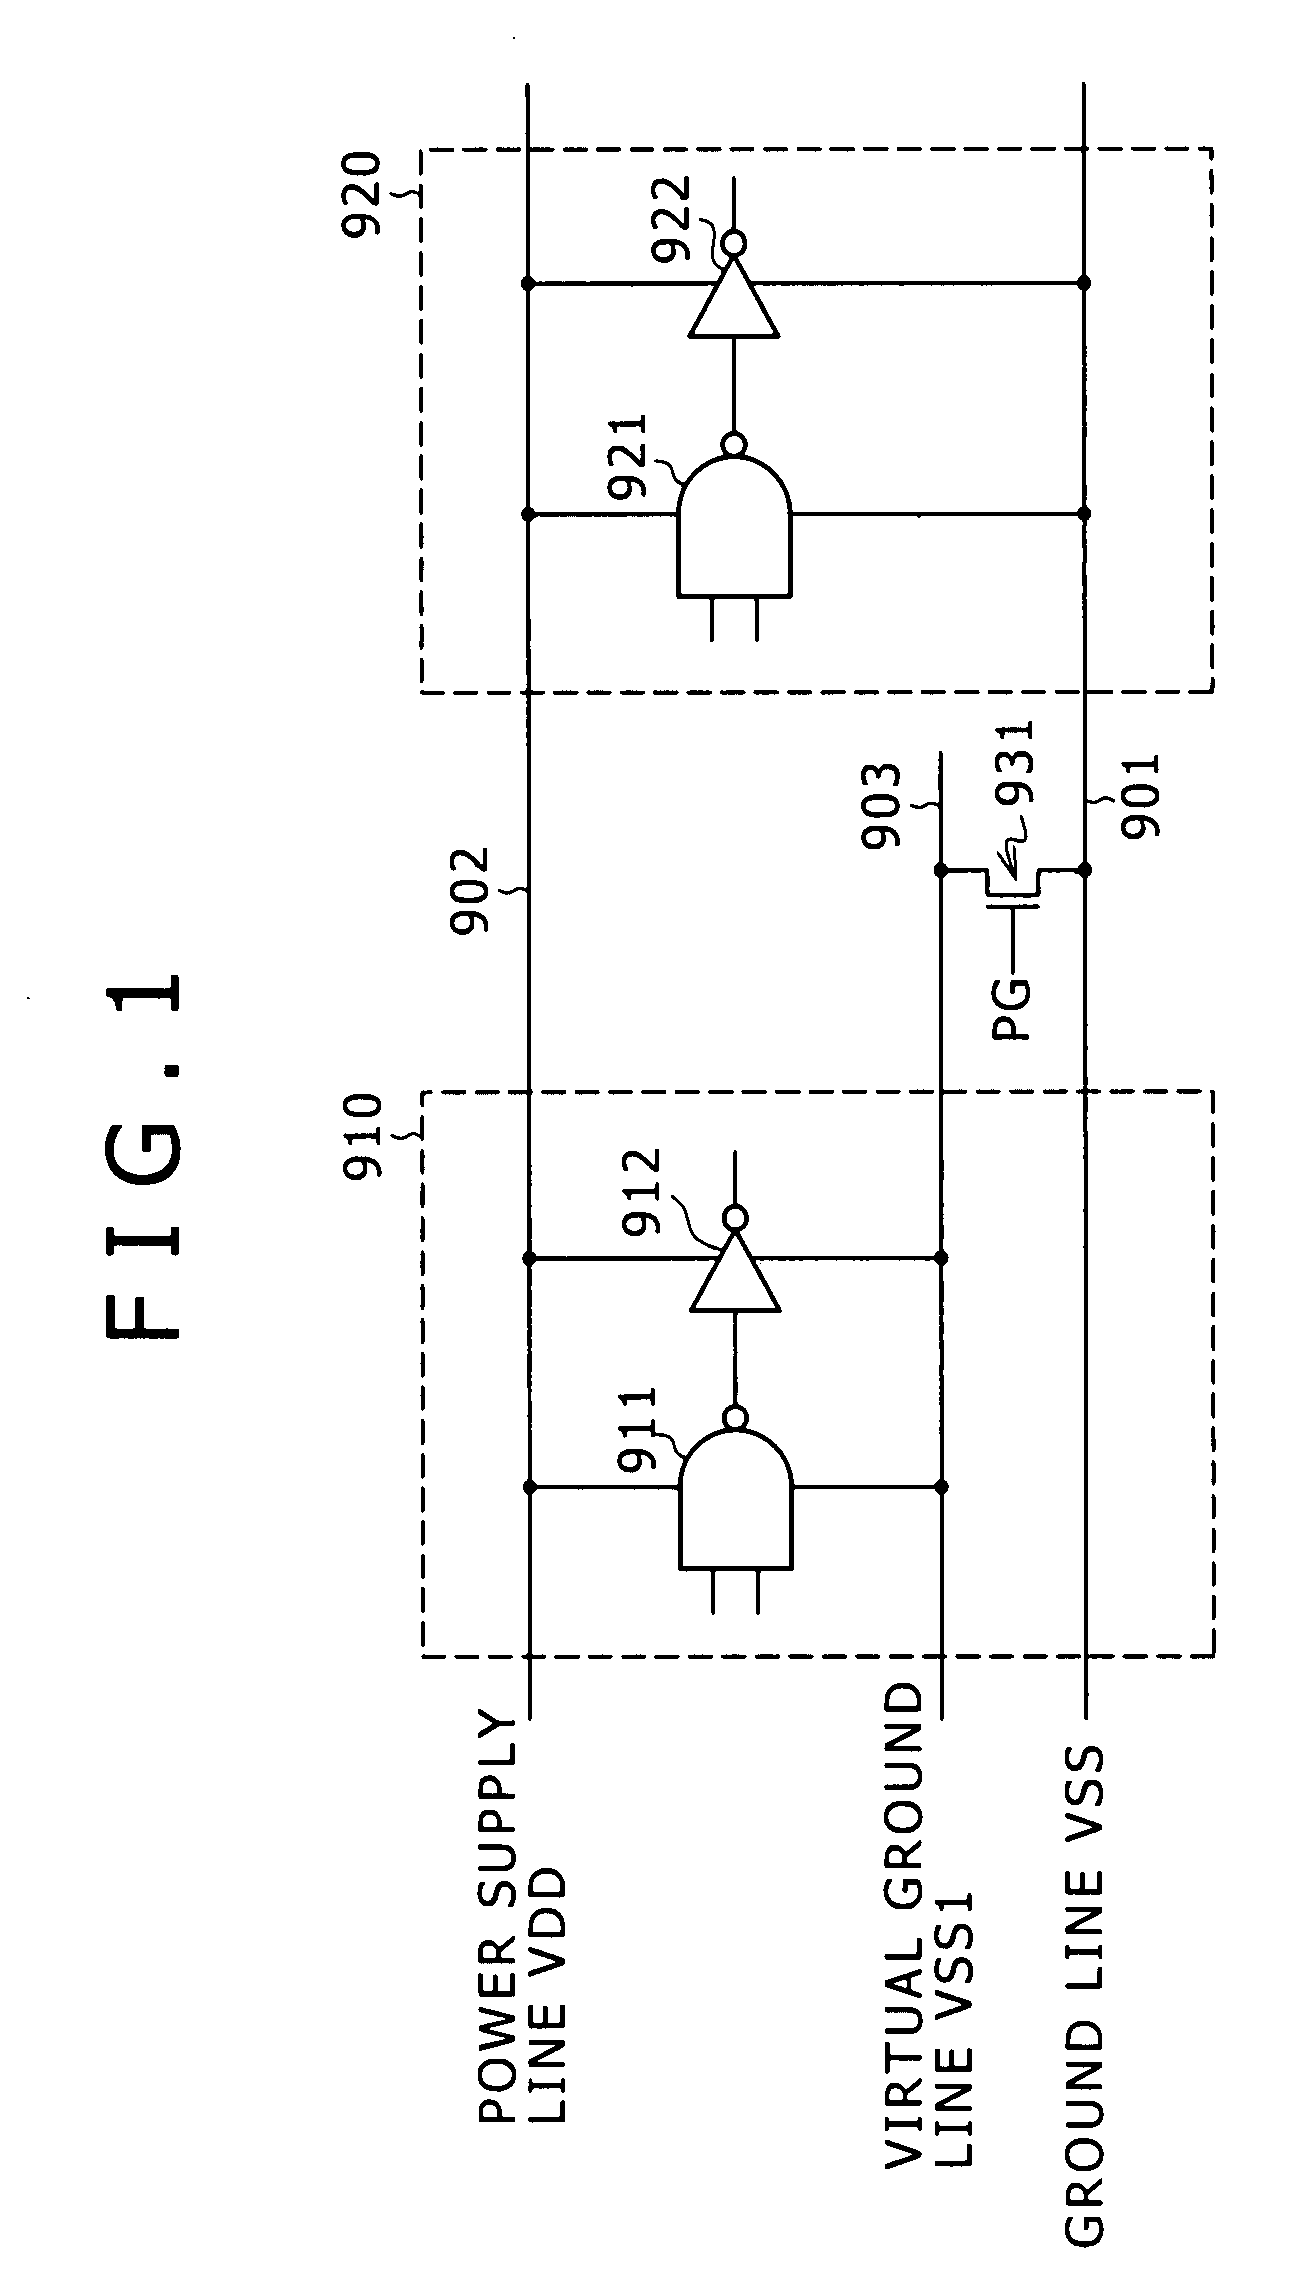 Flip-flop and semiconductor integrated circuit